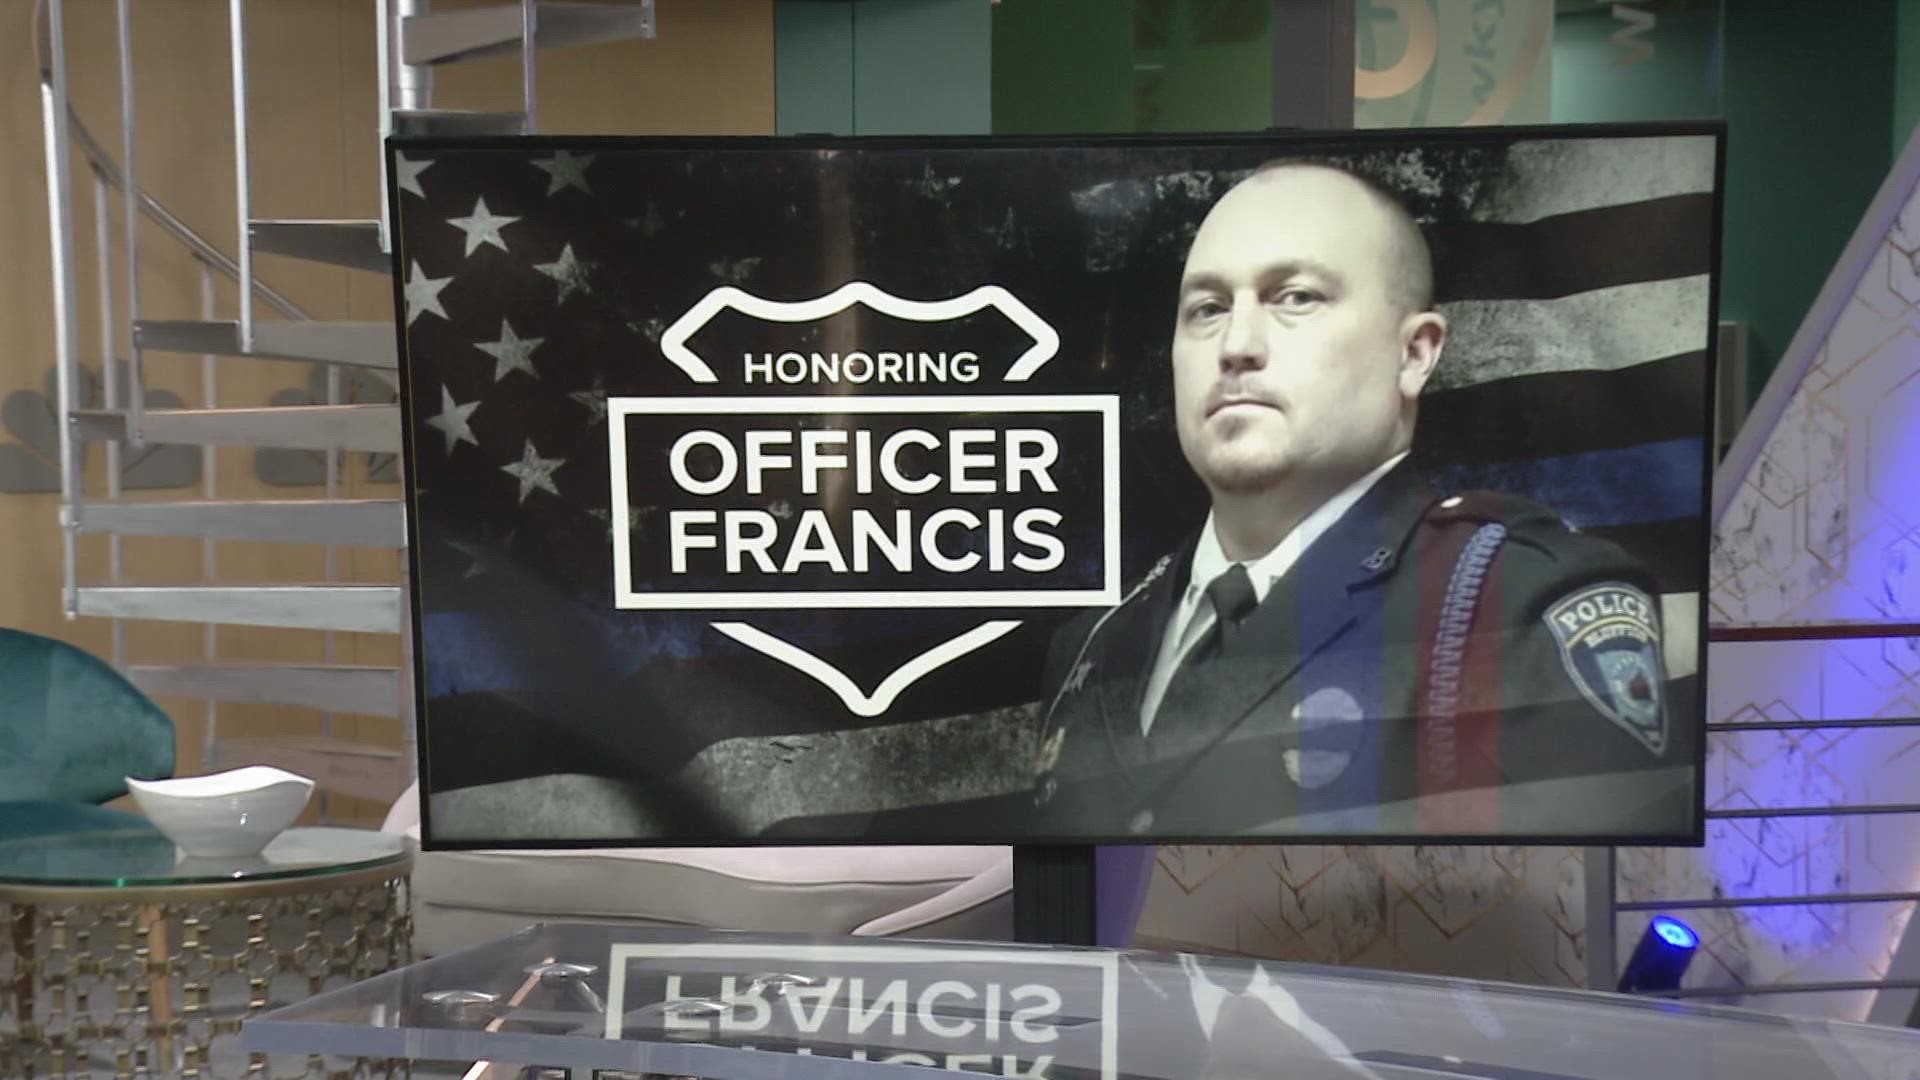 The Northwest Ohio community paid their respects to fallen Bluffton police officer Dominic Francis on Friday.